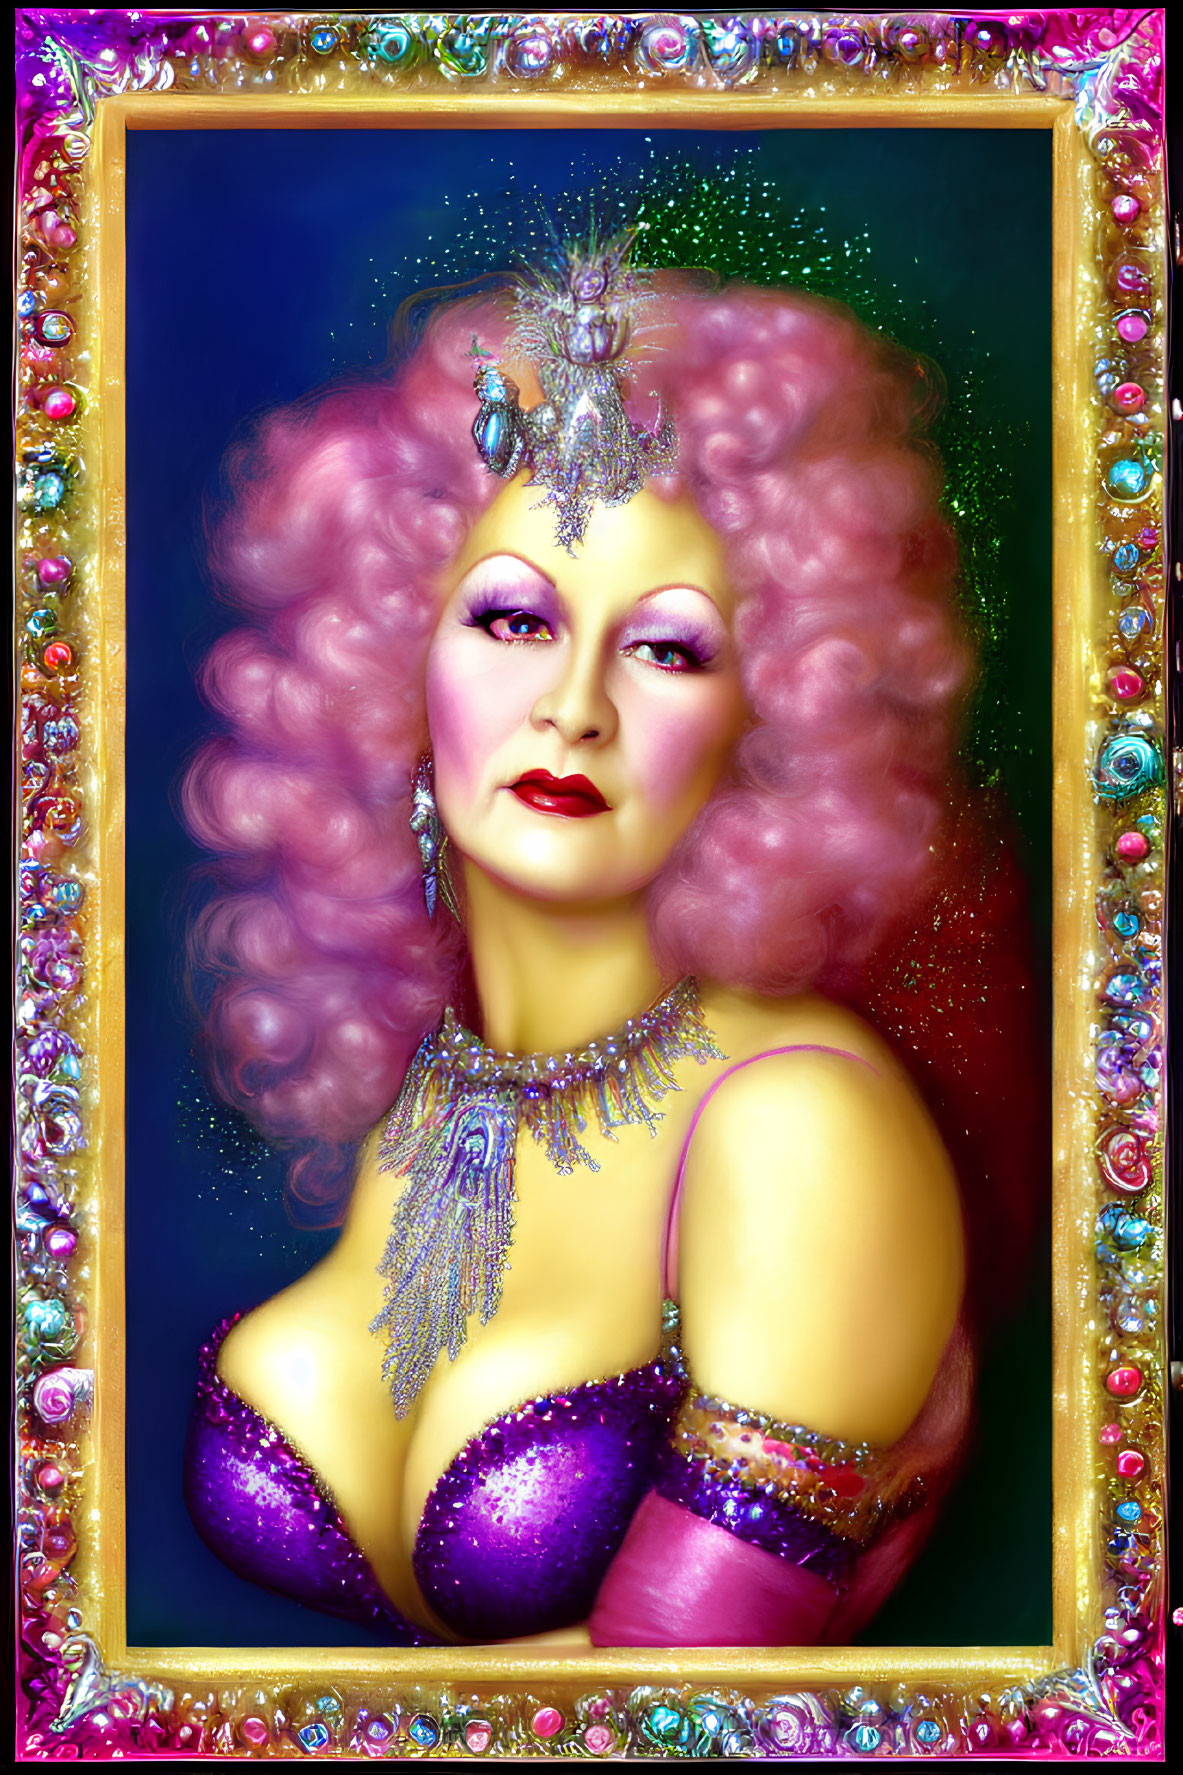 Colorful Portrait of Figure with Pink Hair and Ornate Headdress